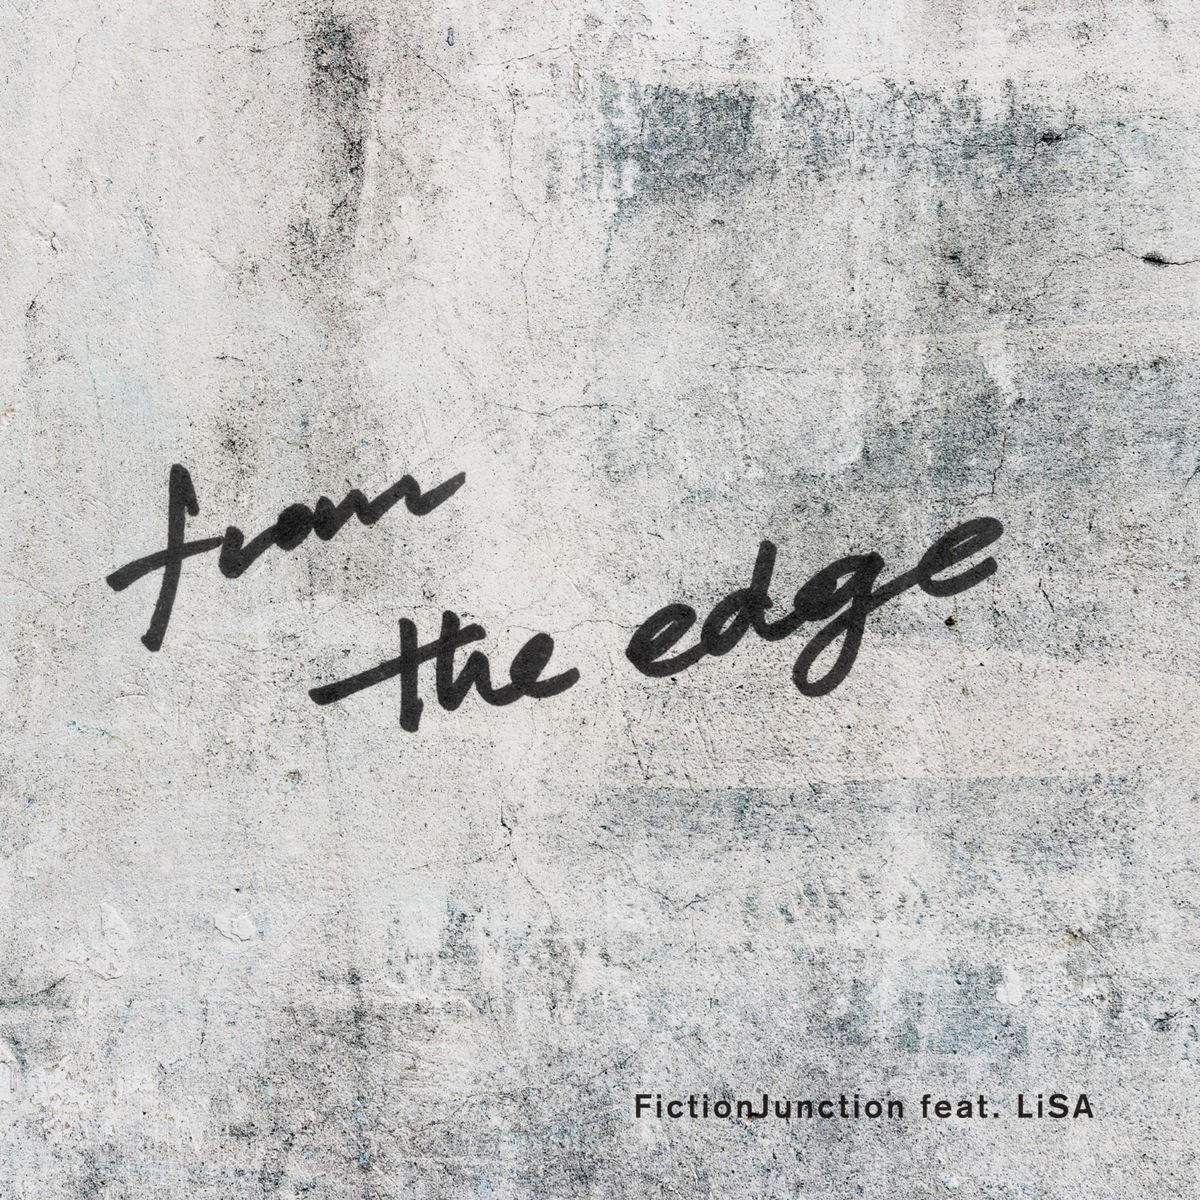 FictionJunction feat. LiSA – from the edge [24bit Lossless + MP3 320 / WEB] [2019.09.02]